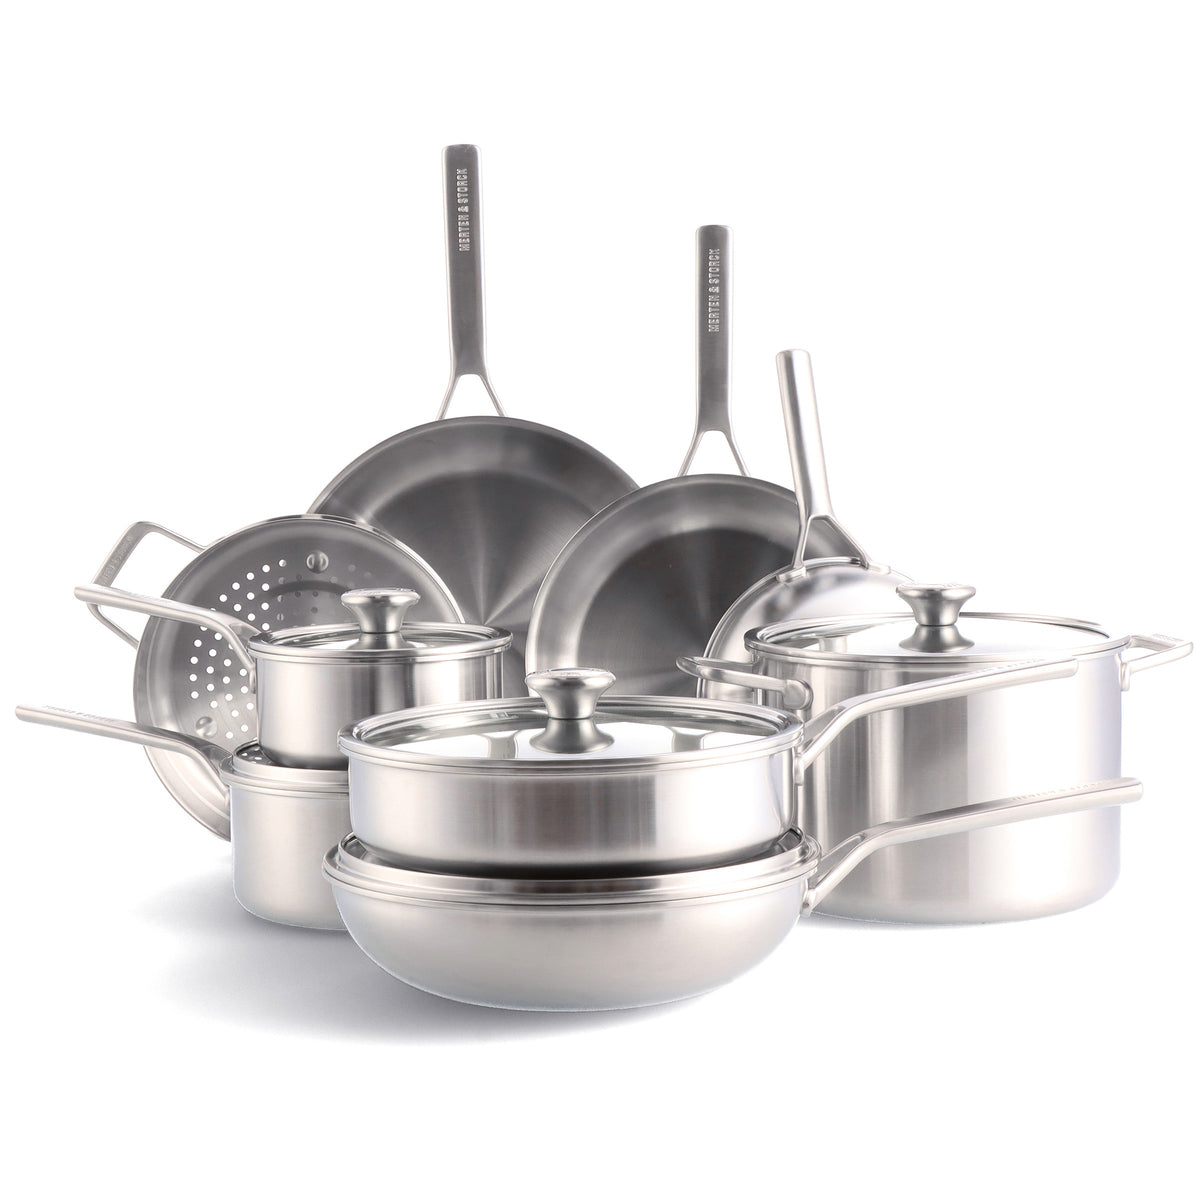 Imarku 14 Pieces Tri-Ply Three Layers Stainless Steel Cookware Set